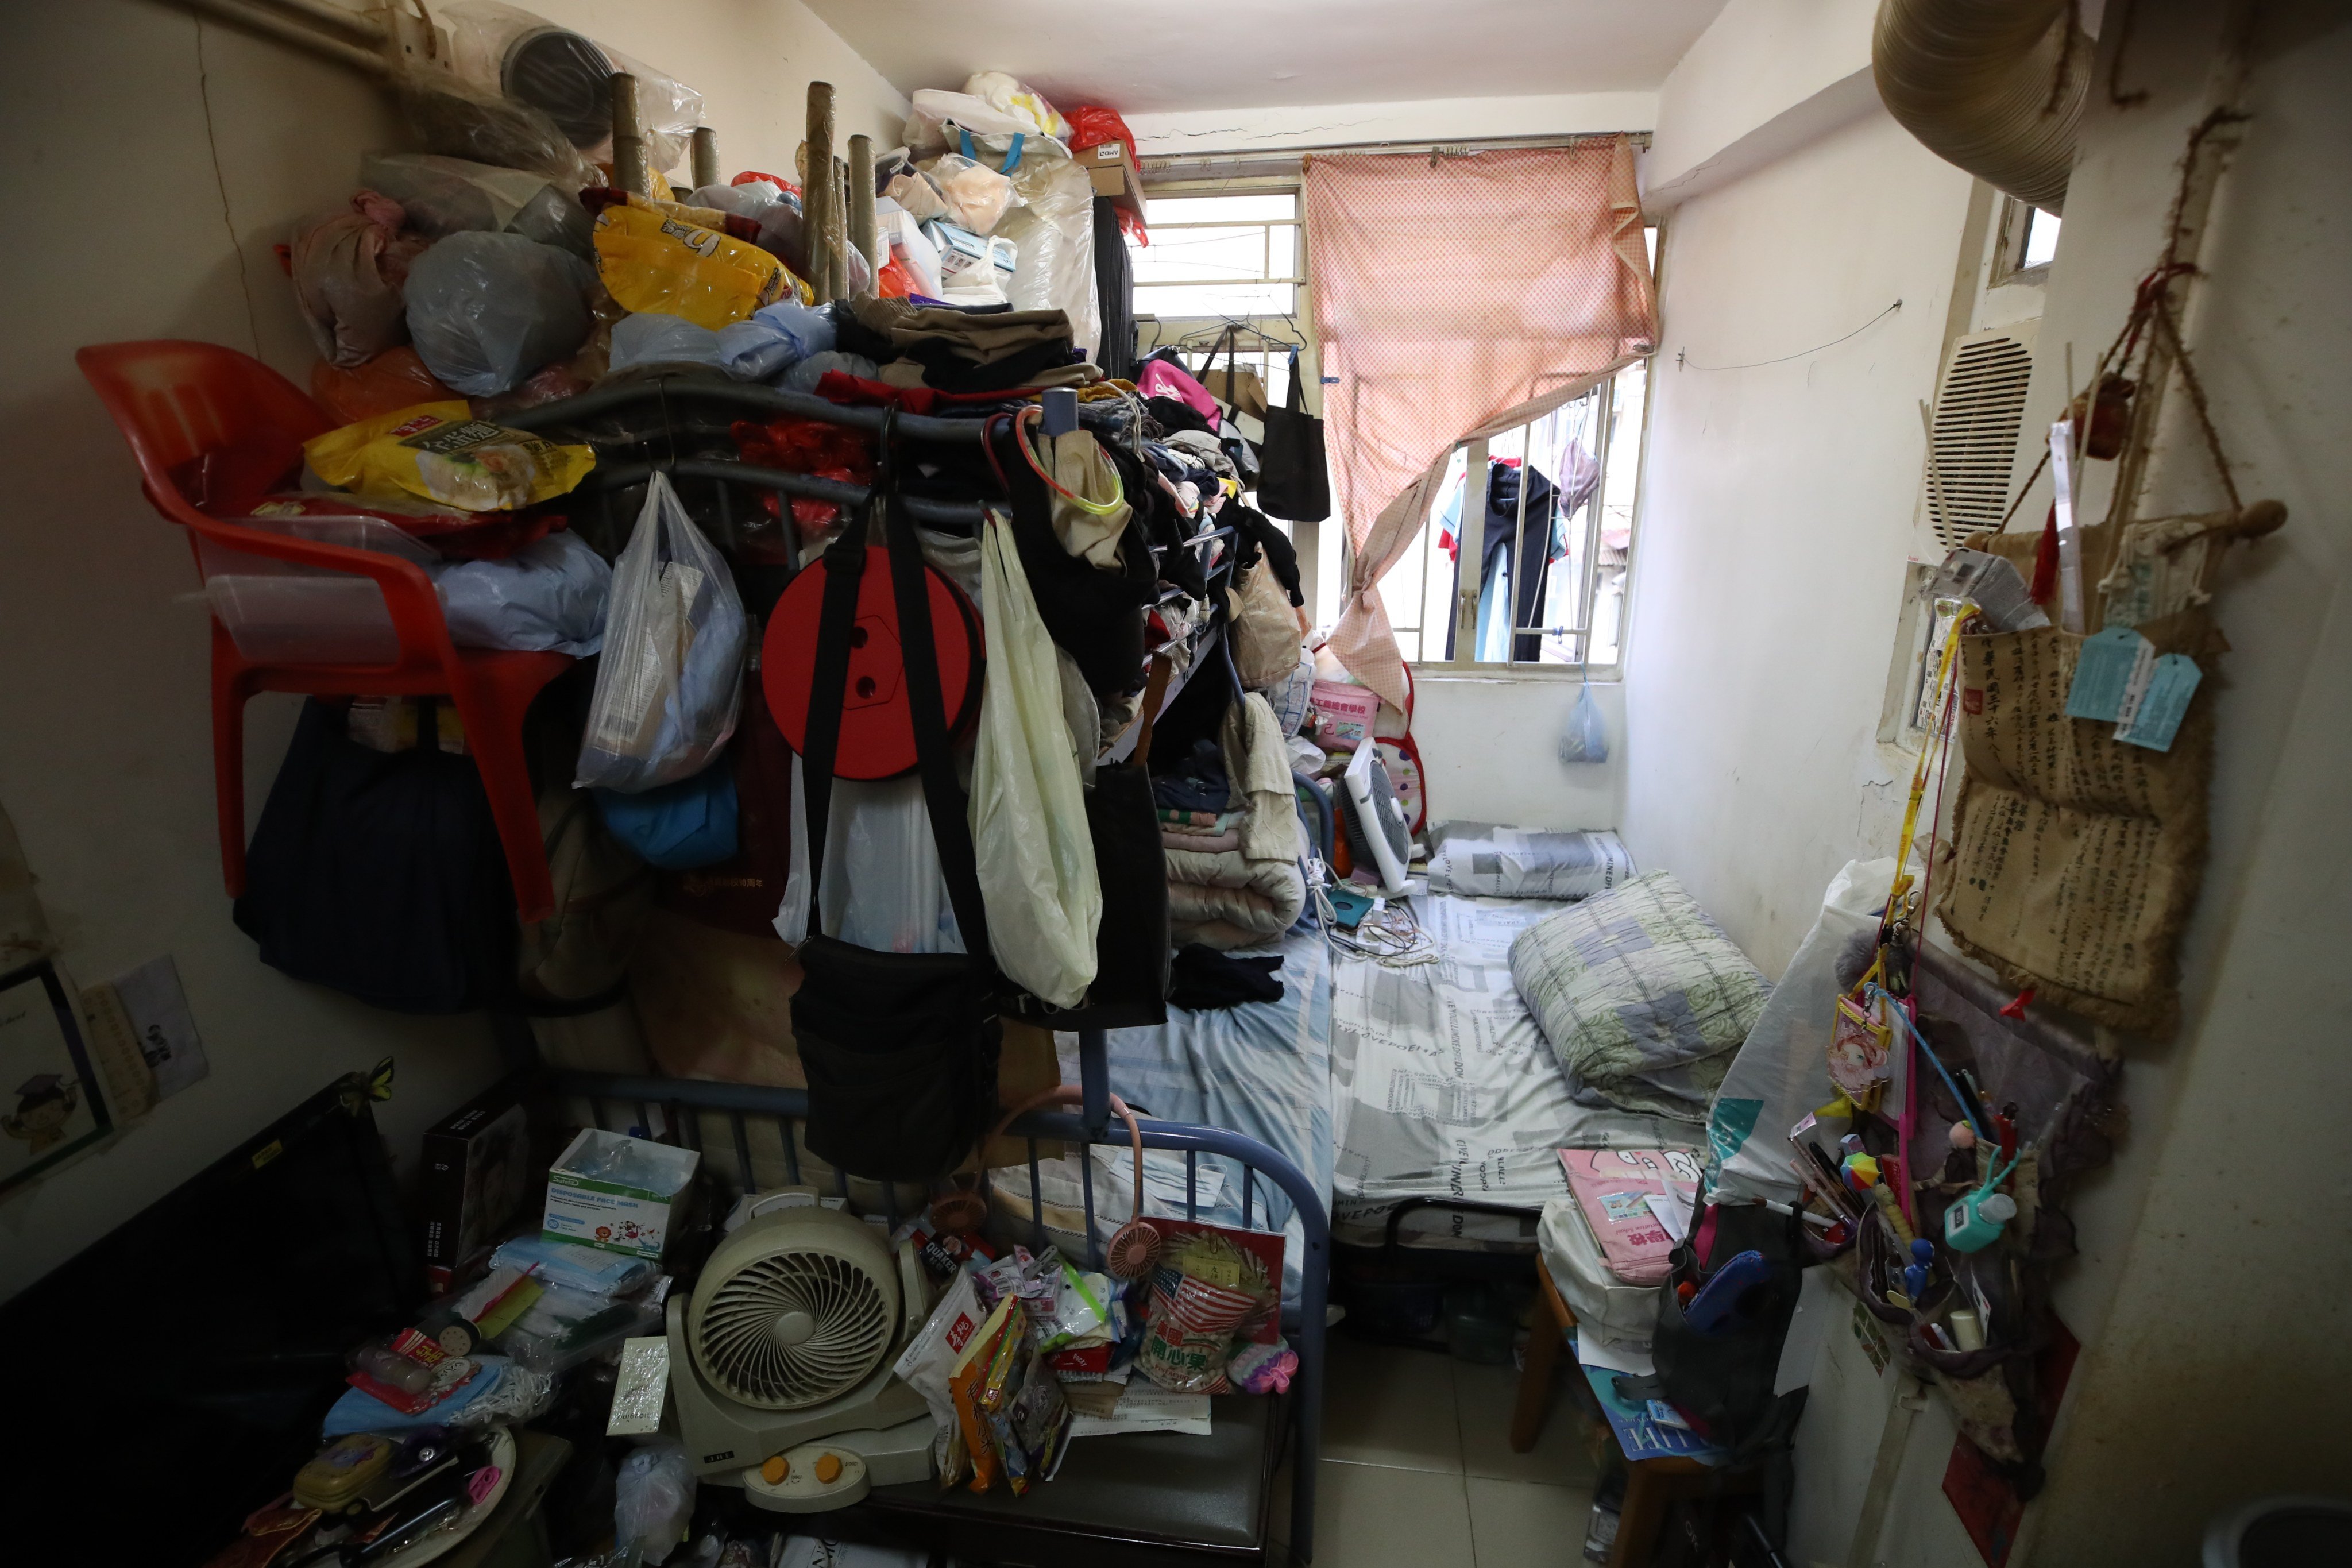 A subdivided flat in Sham Shui Po on November 9. Currently, many tenants of such units live in unsafe, substandard or unhygienic conditions. Photo: Edmond So